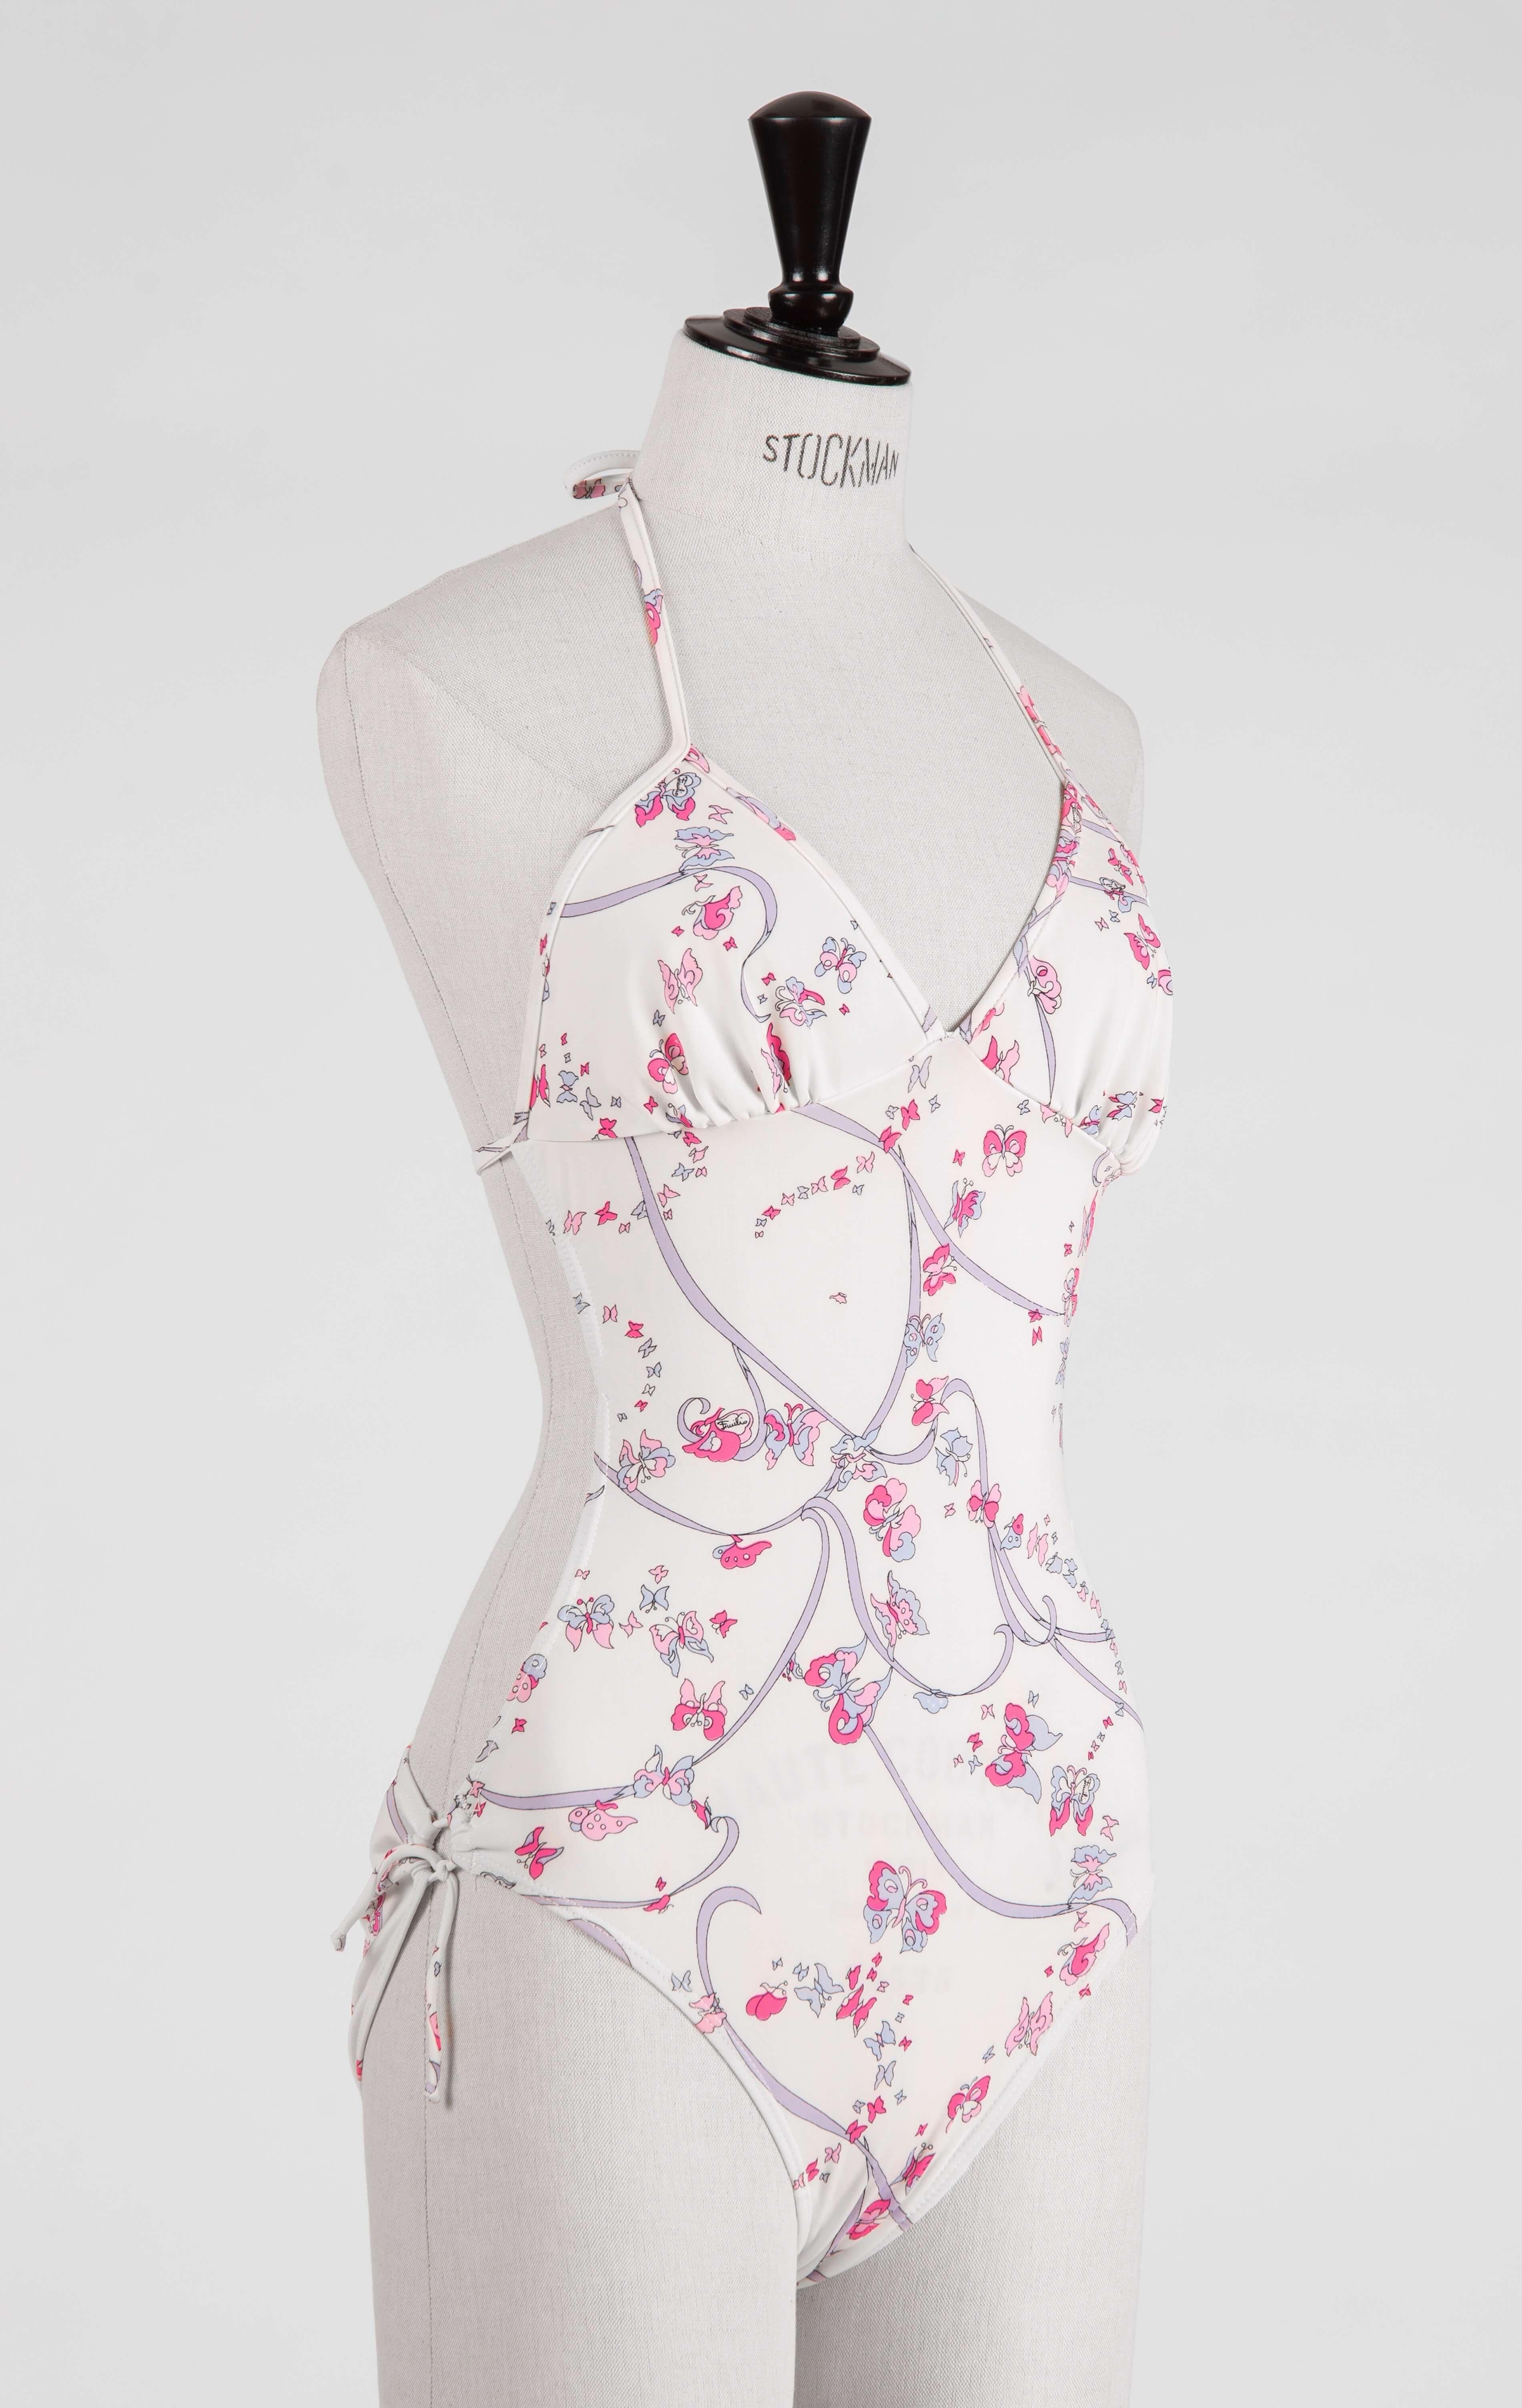 Add a dose of Emilio Pucci's 1970s signature jet set glamour to your beachwear or vintage fashion collection. This fabulous and rare one-piece vintage swimsuit is splashed with one of Pucci's iconic butterfly prints in neon pink, baby pink, blue and